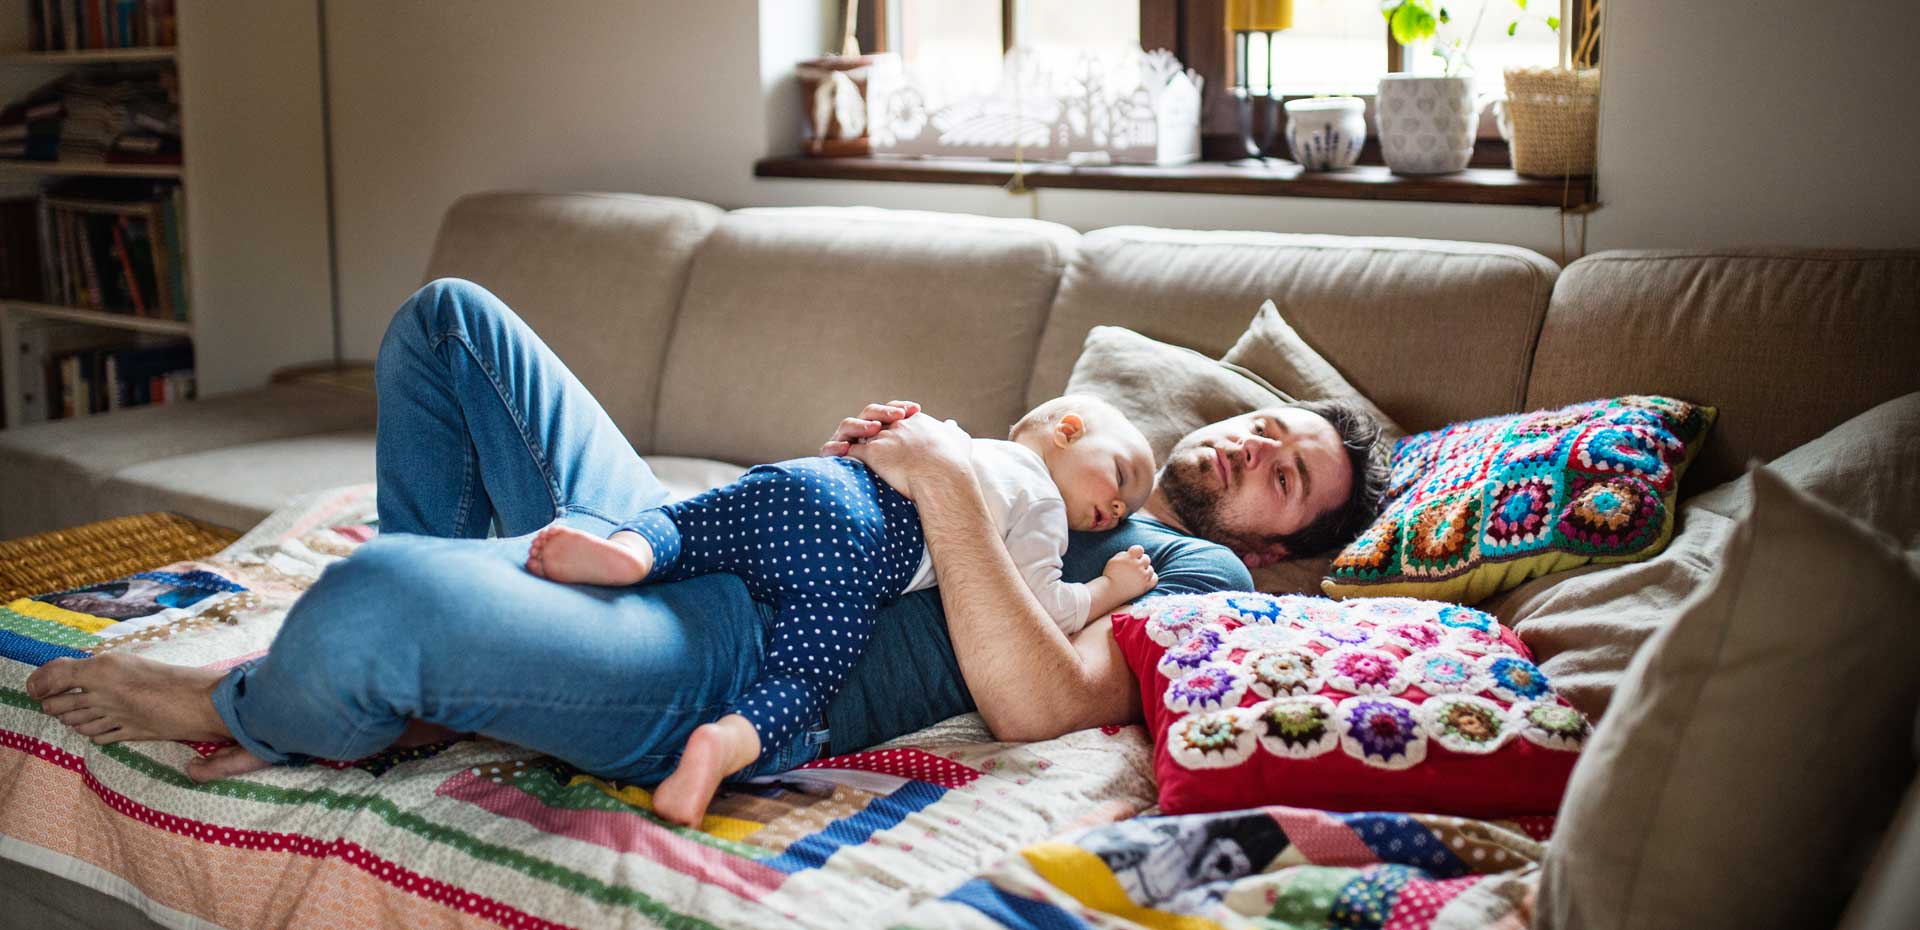 A man laying on a sofa, with his baby asleep on him.